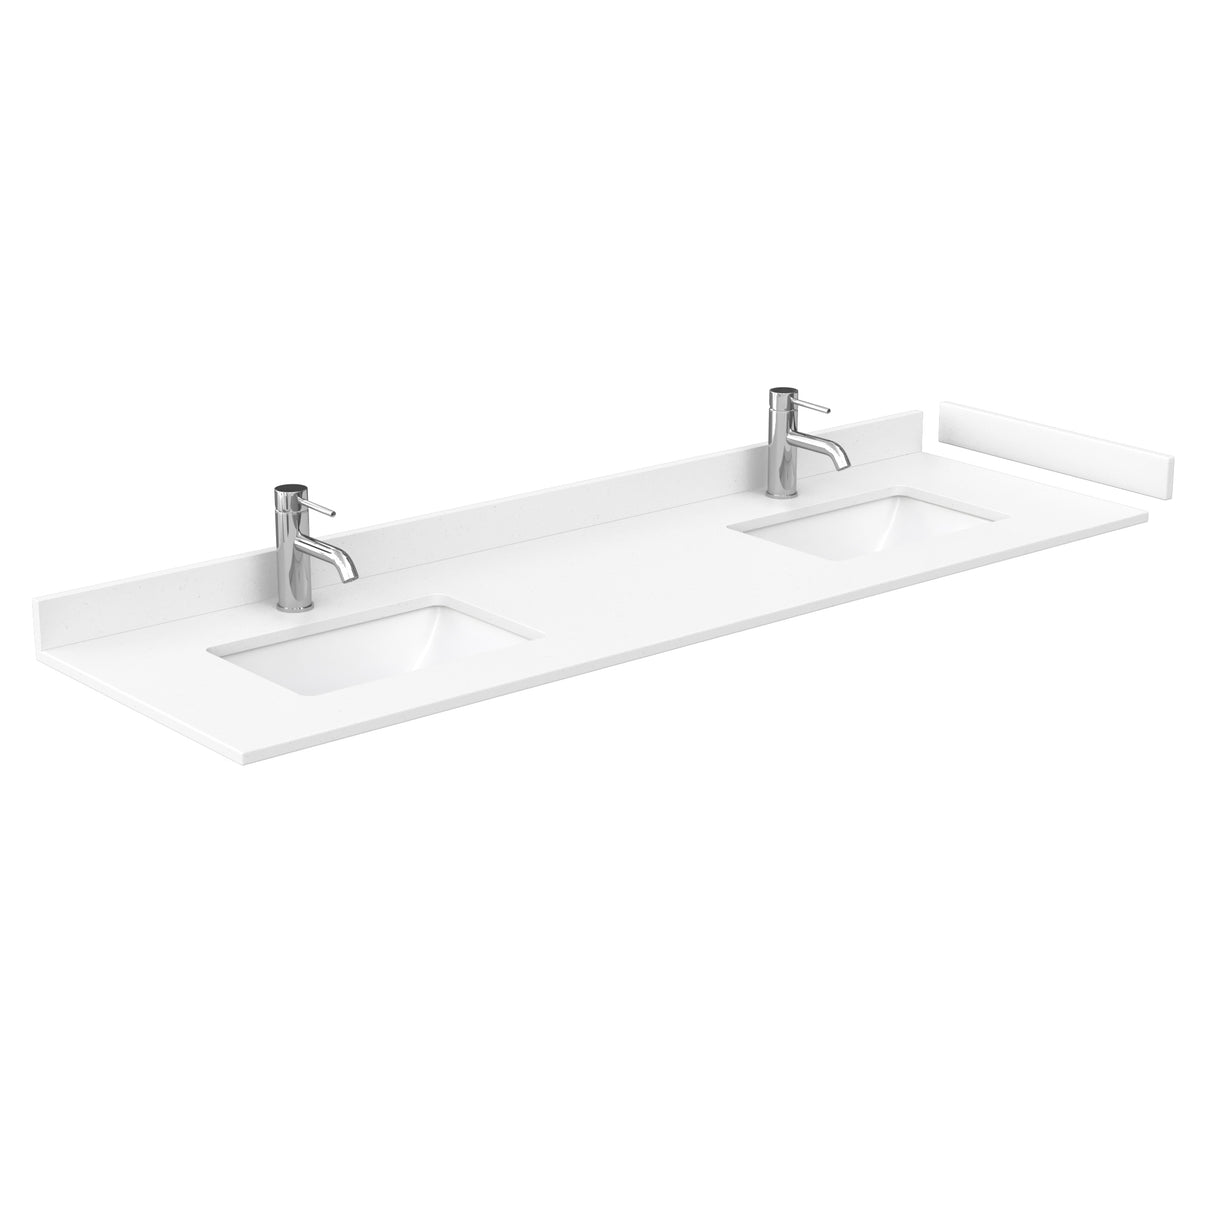 Miranda 72 Inch Double Bathroom Vanity in White White Cultured Marble Countertop Undermount Square Sinks Brushed Nickel Trim 70 Inch Mirror